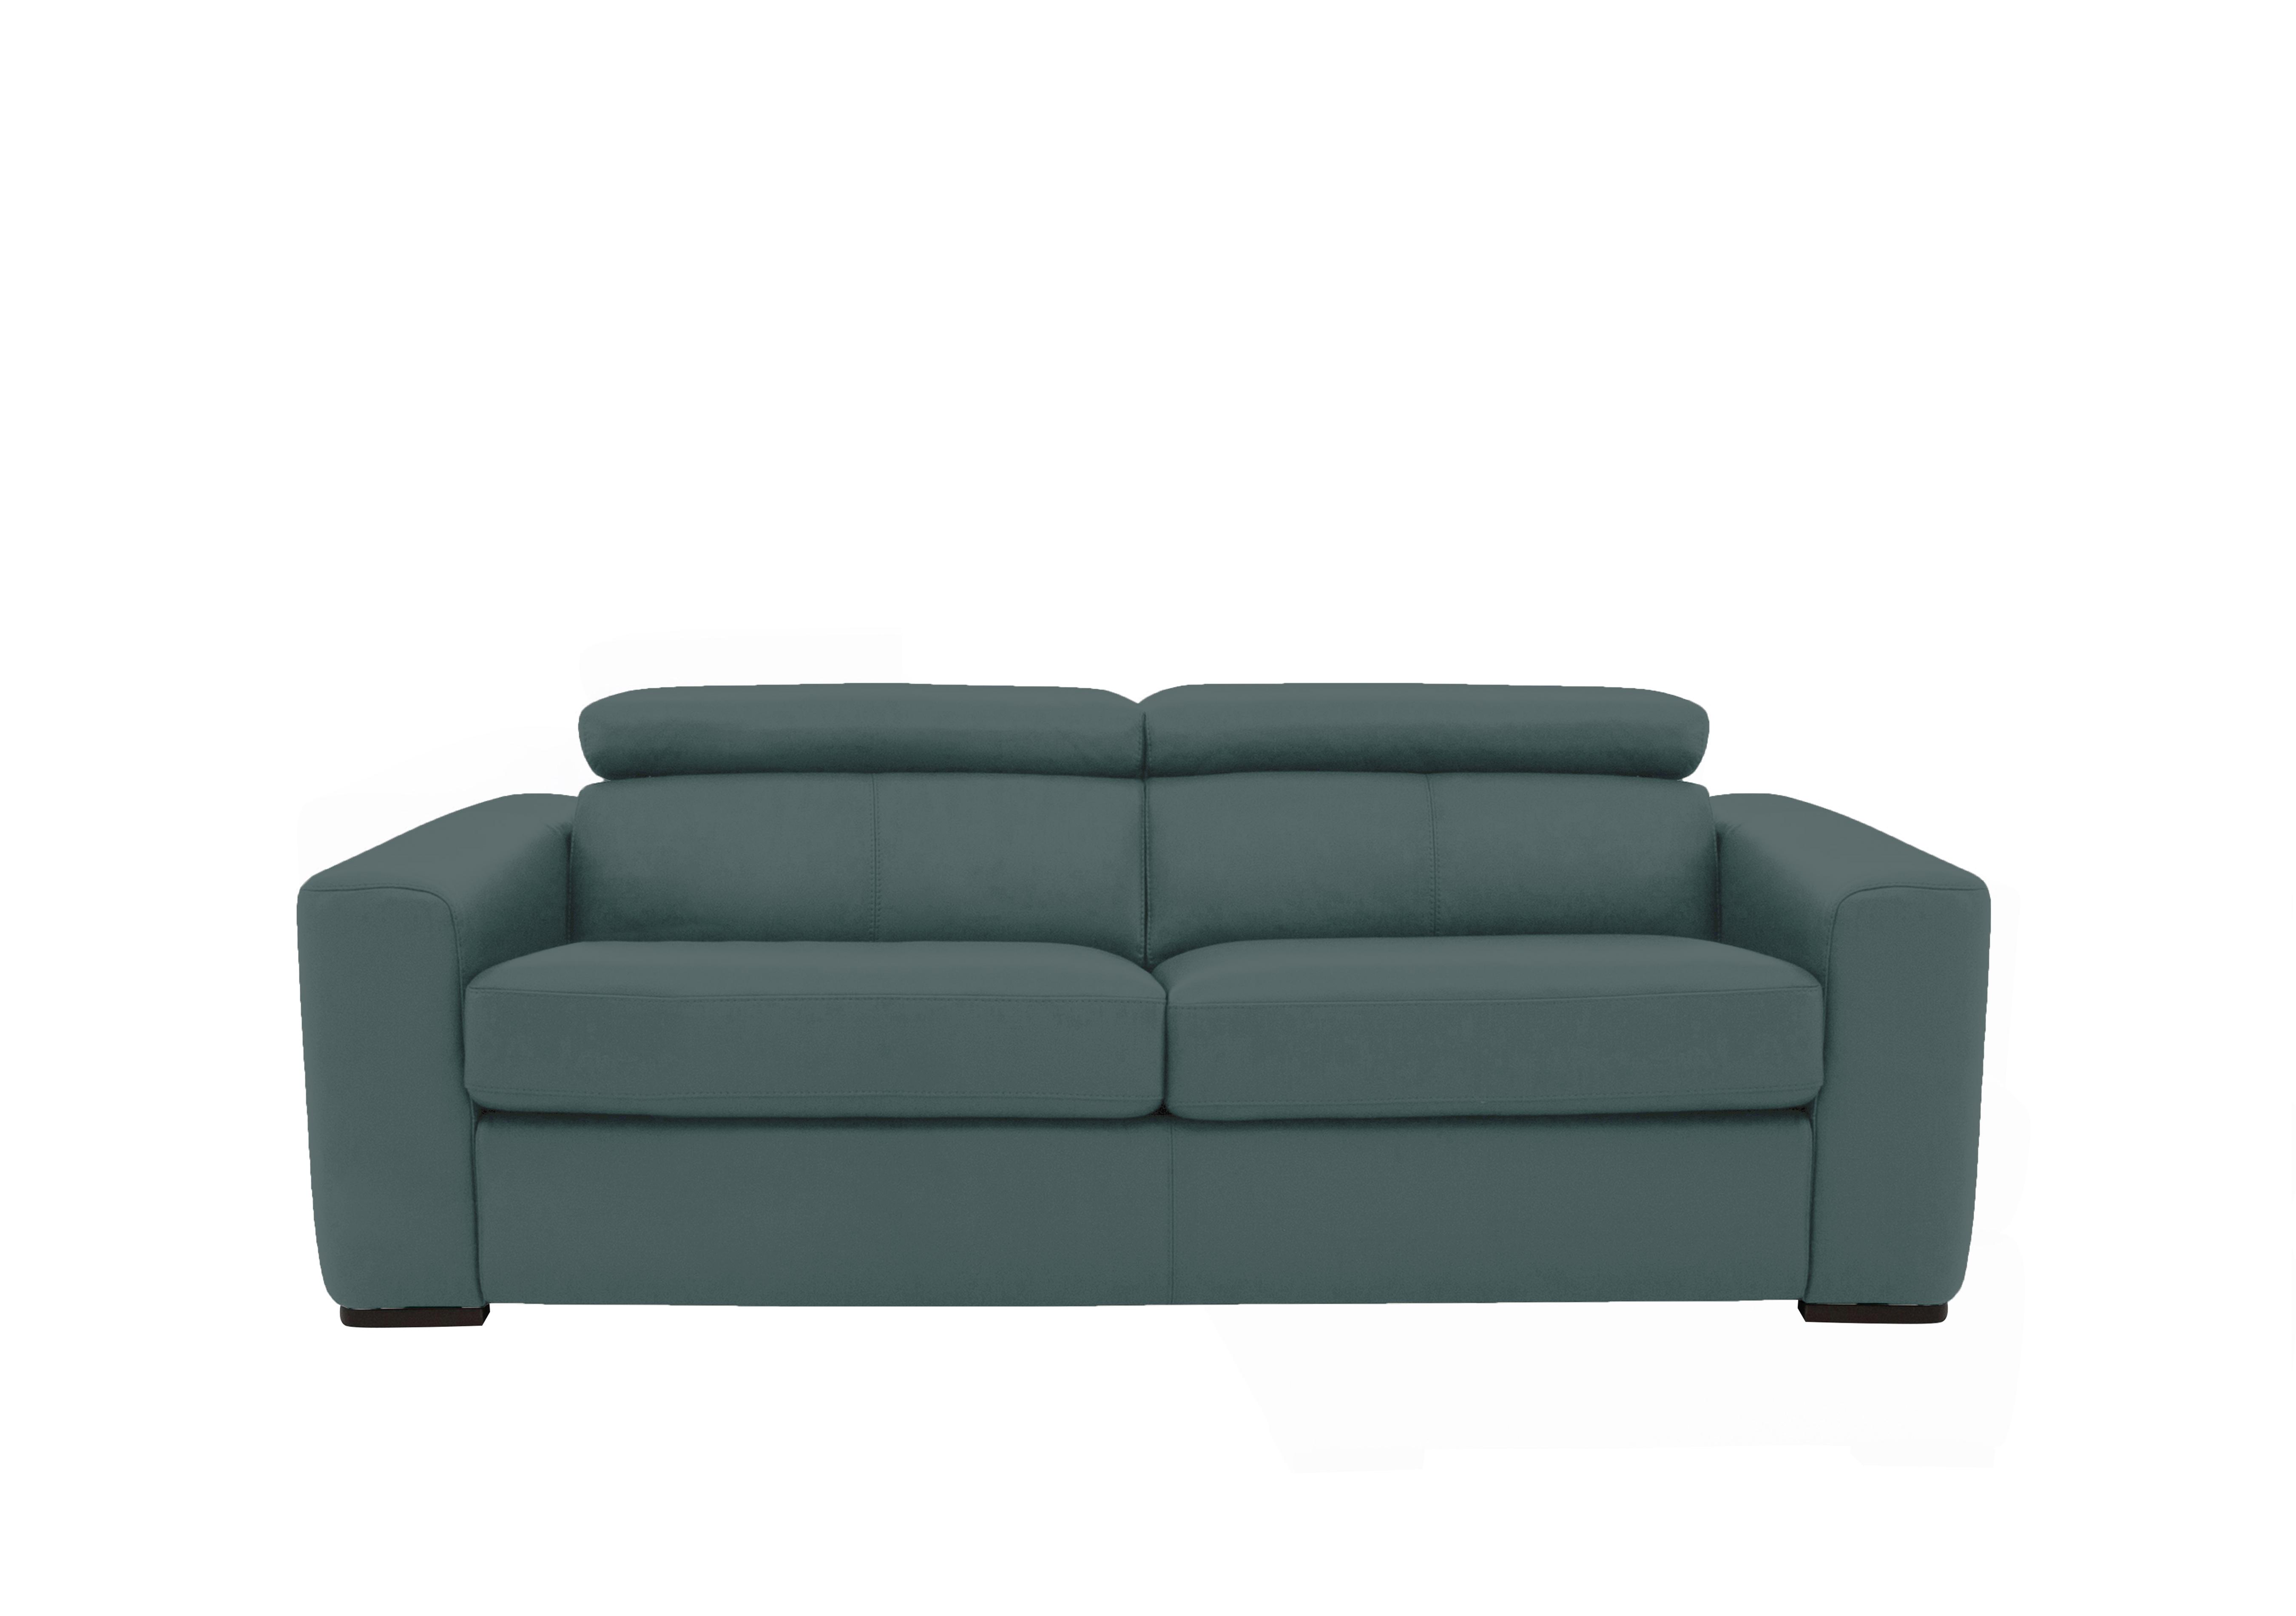 Infinity 3 Seater Leather Sofa in Bv-301e Lake Green on Furniture Village